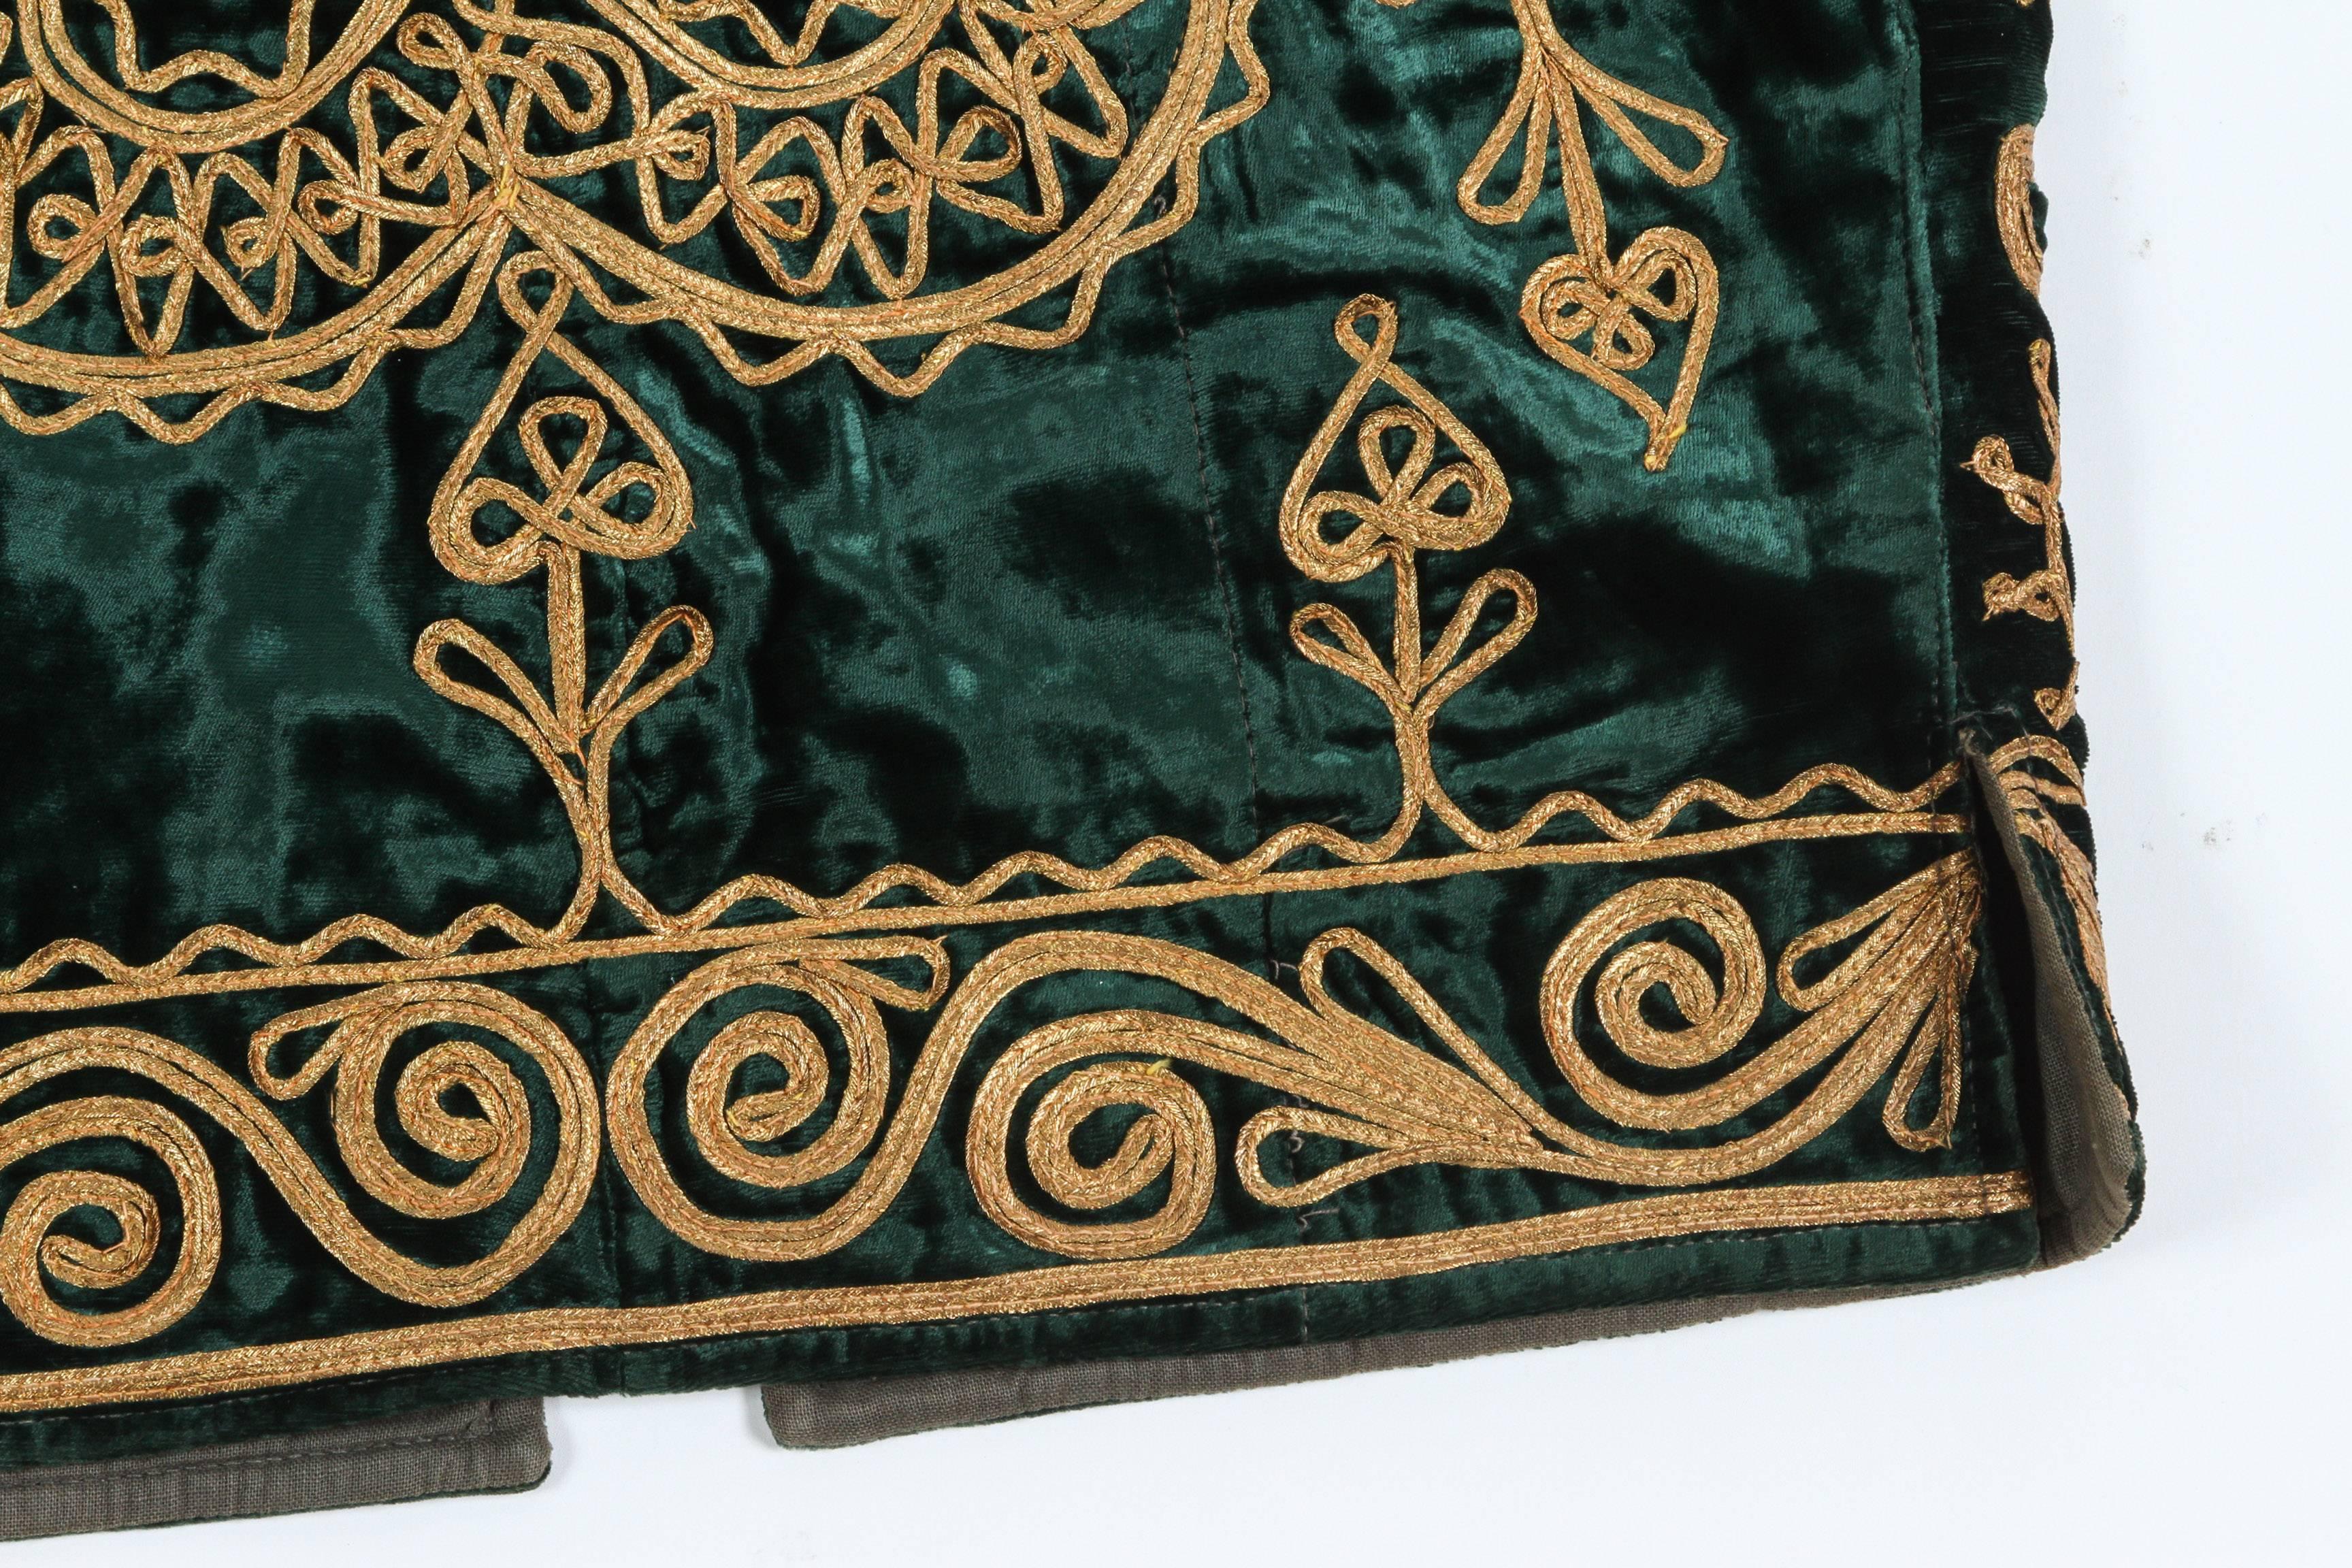 Hand-Crafted Authentic Ottoman Turkish Vest in Green Velvet